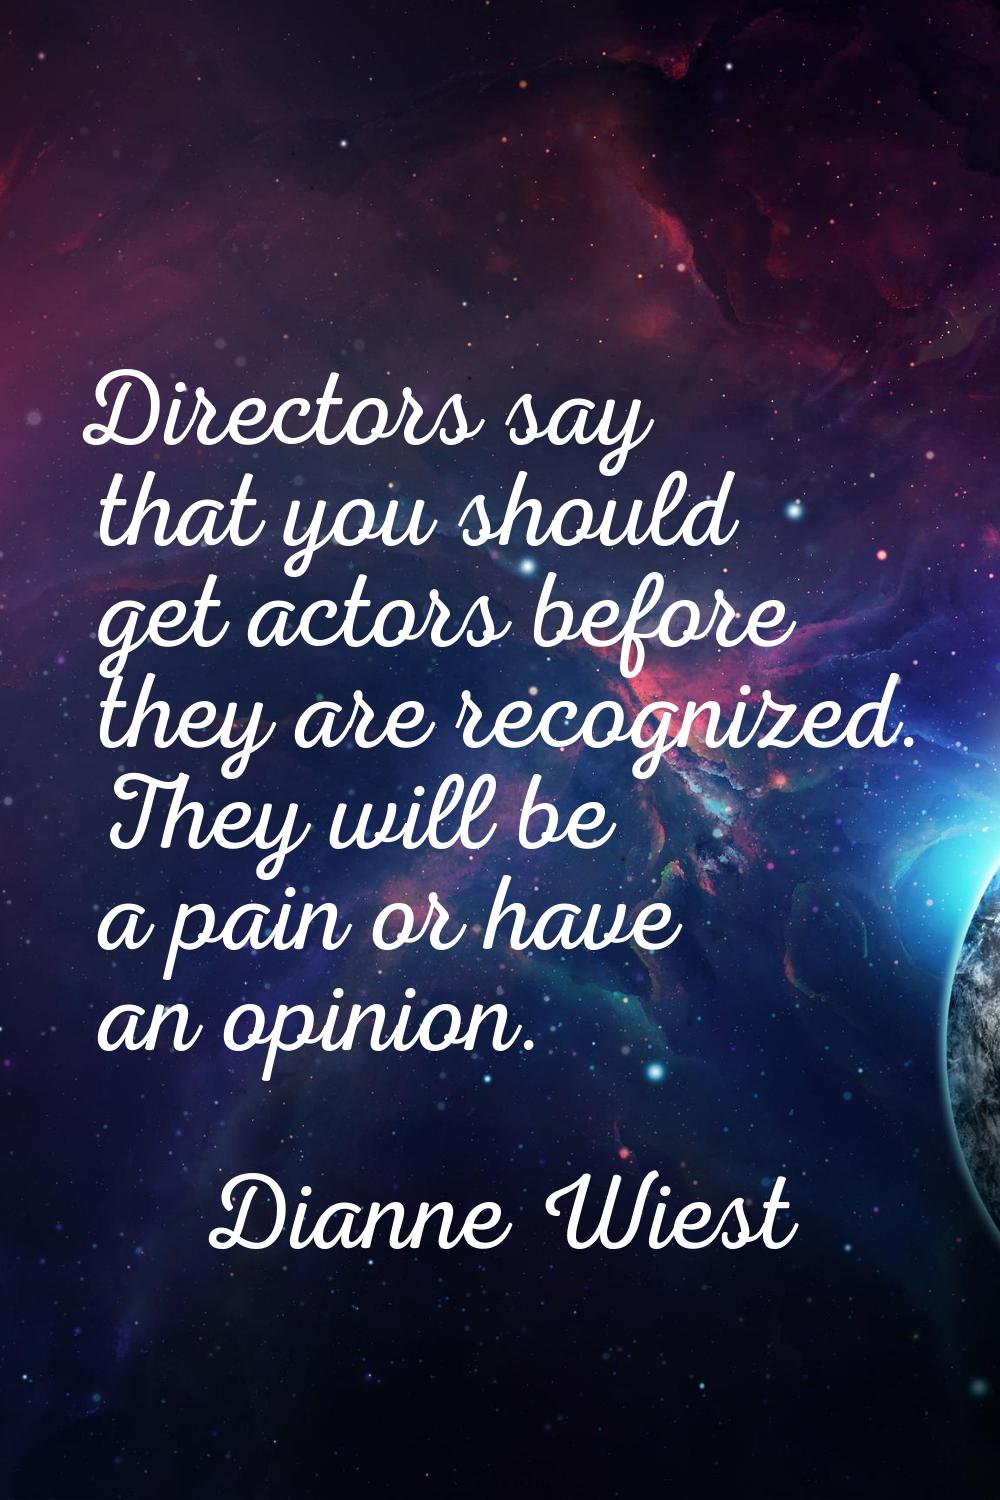 Directors say that you should get actors before they are recognized. They will be a pain or have an